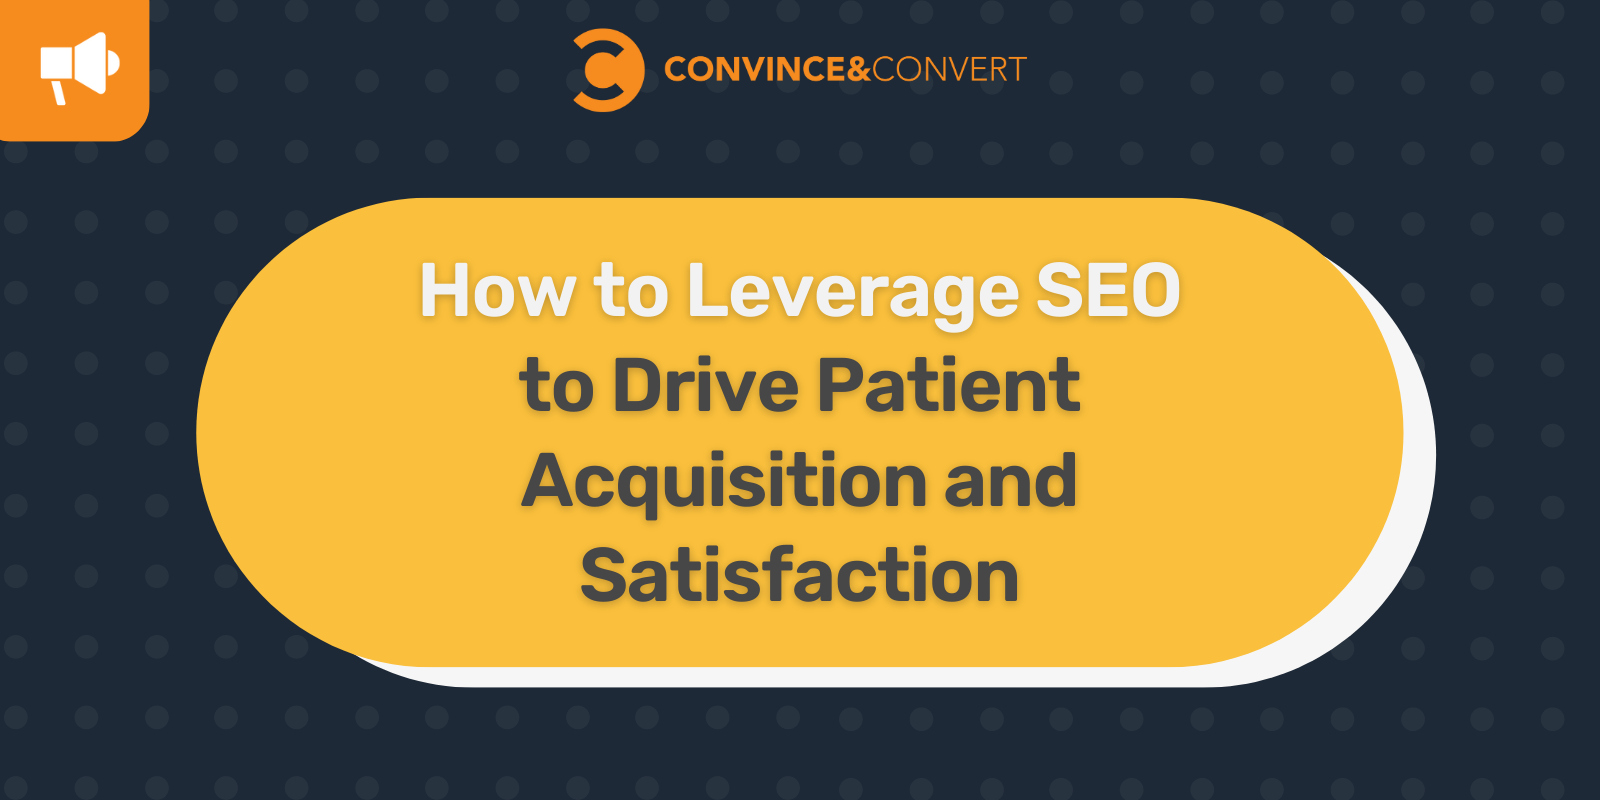 You are currently viewing How to Leverage SEO to Drive Patient Acquisition and Satisfaction